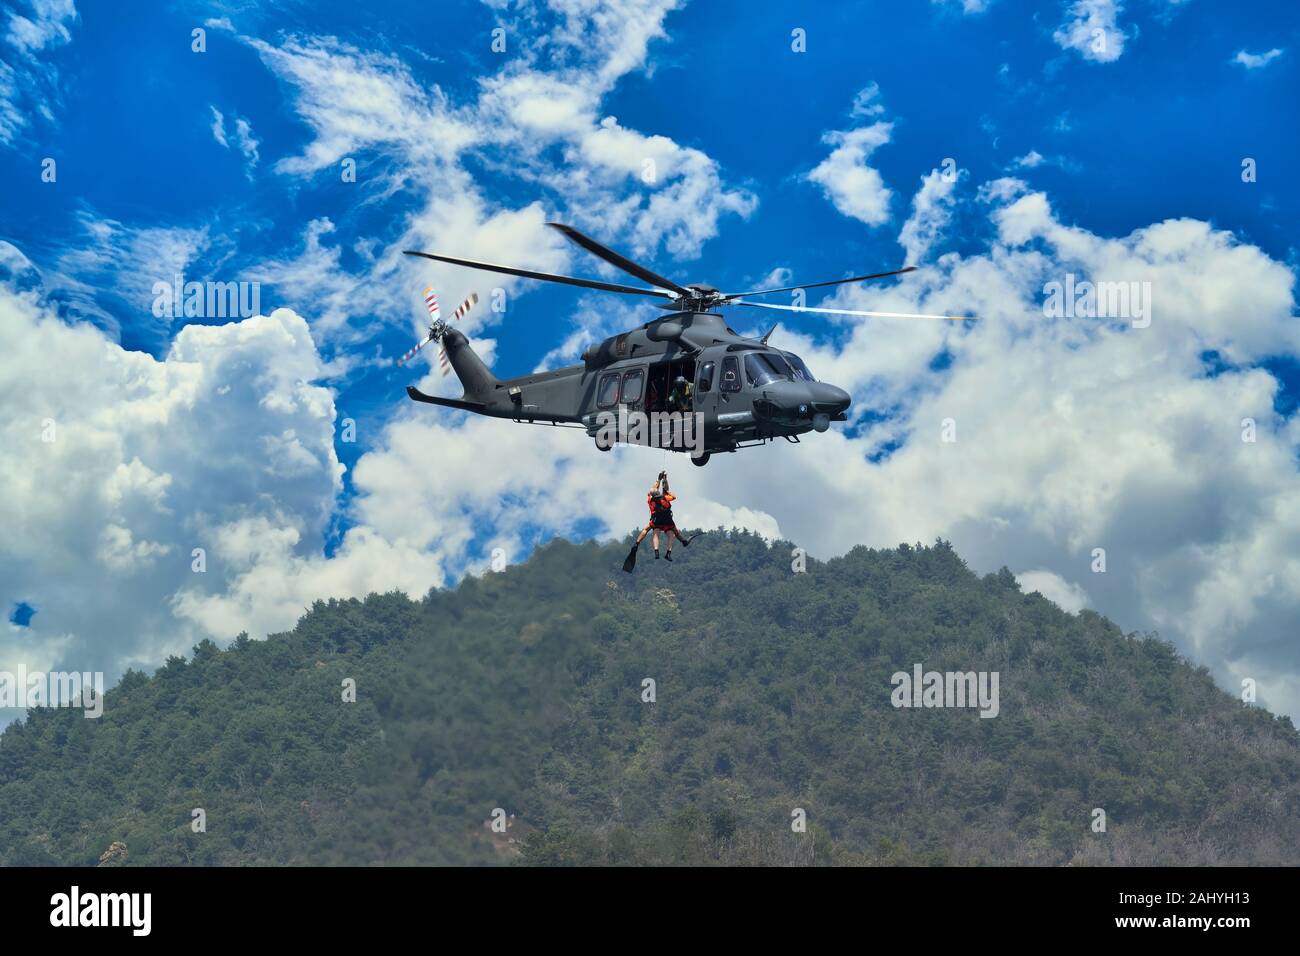 A low altitude military helicopter Stock Photo